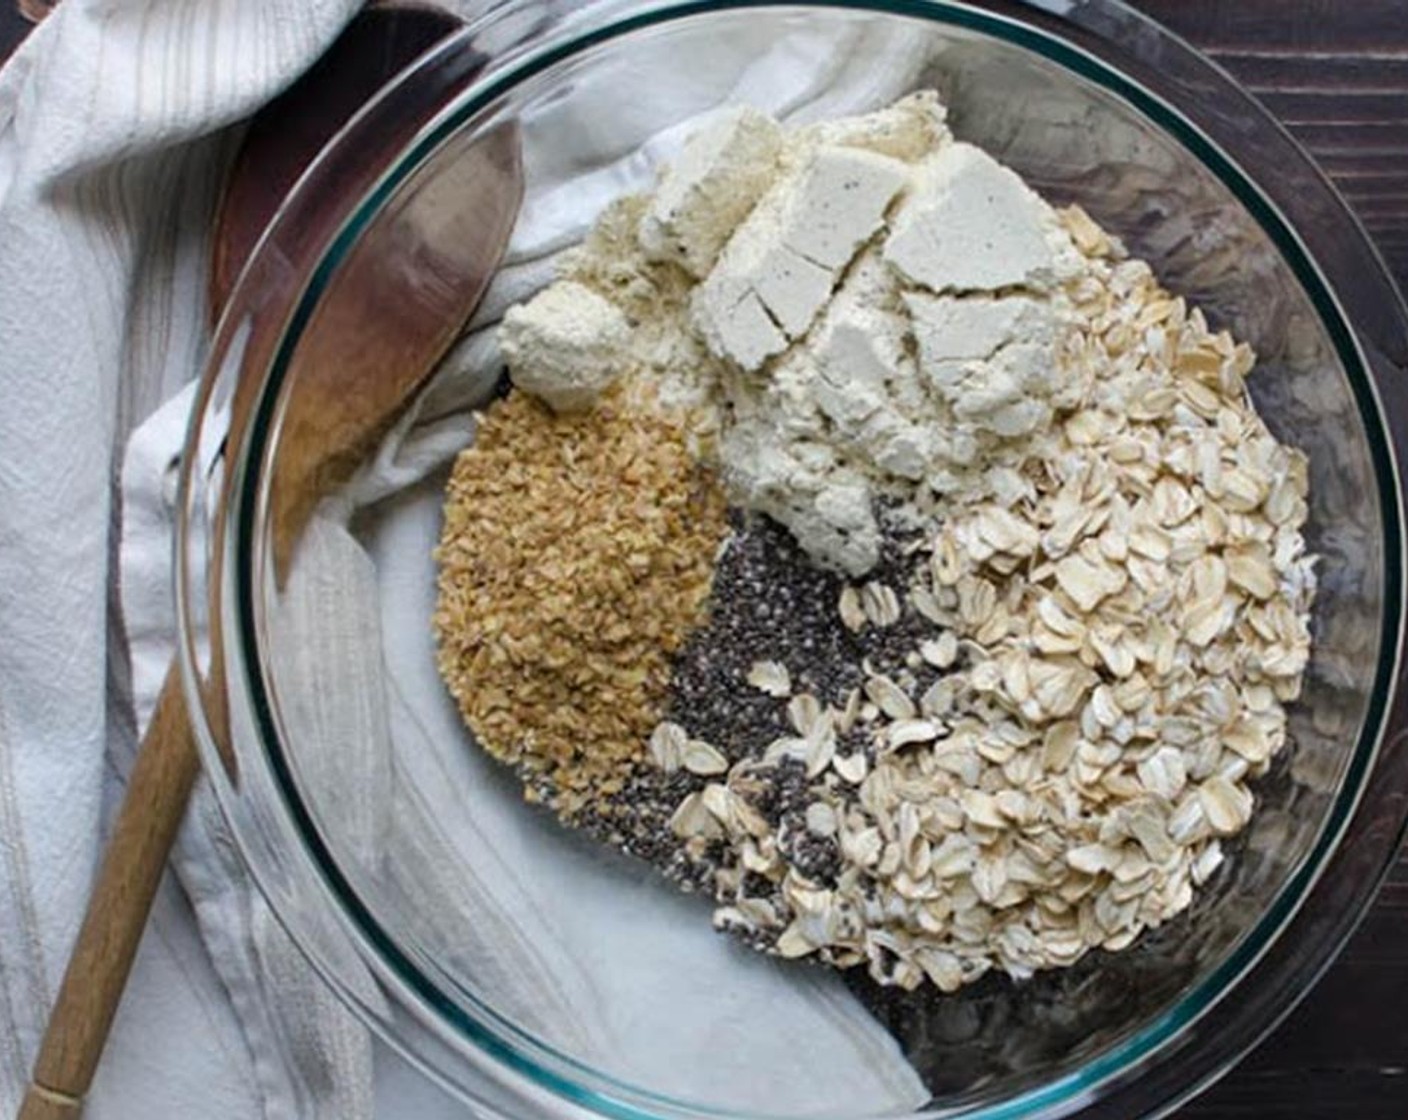 step 1 In a medium bowl, combine the Old Fashioned Rolled Oats (1 1/2 cups), Protein Powder (1/2 cup), Flaxseed Meal (1 Tbsp) and Chia Seeds (1 Tbsp) and stir to combine.